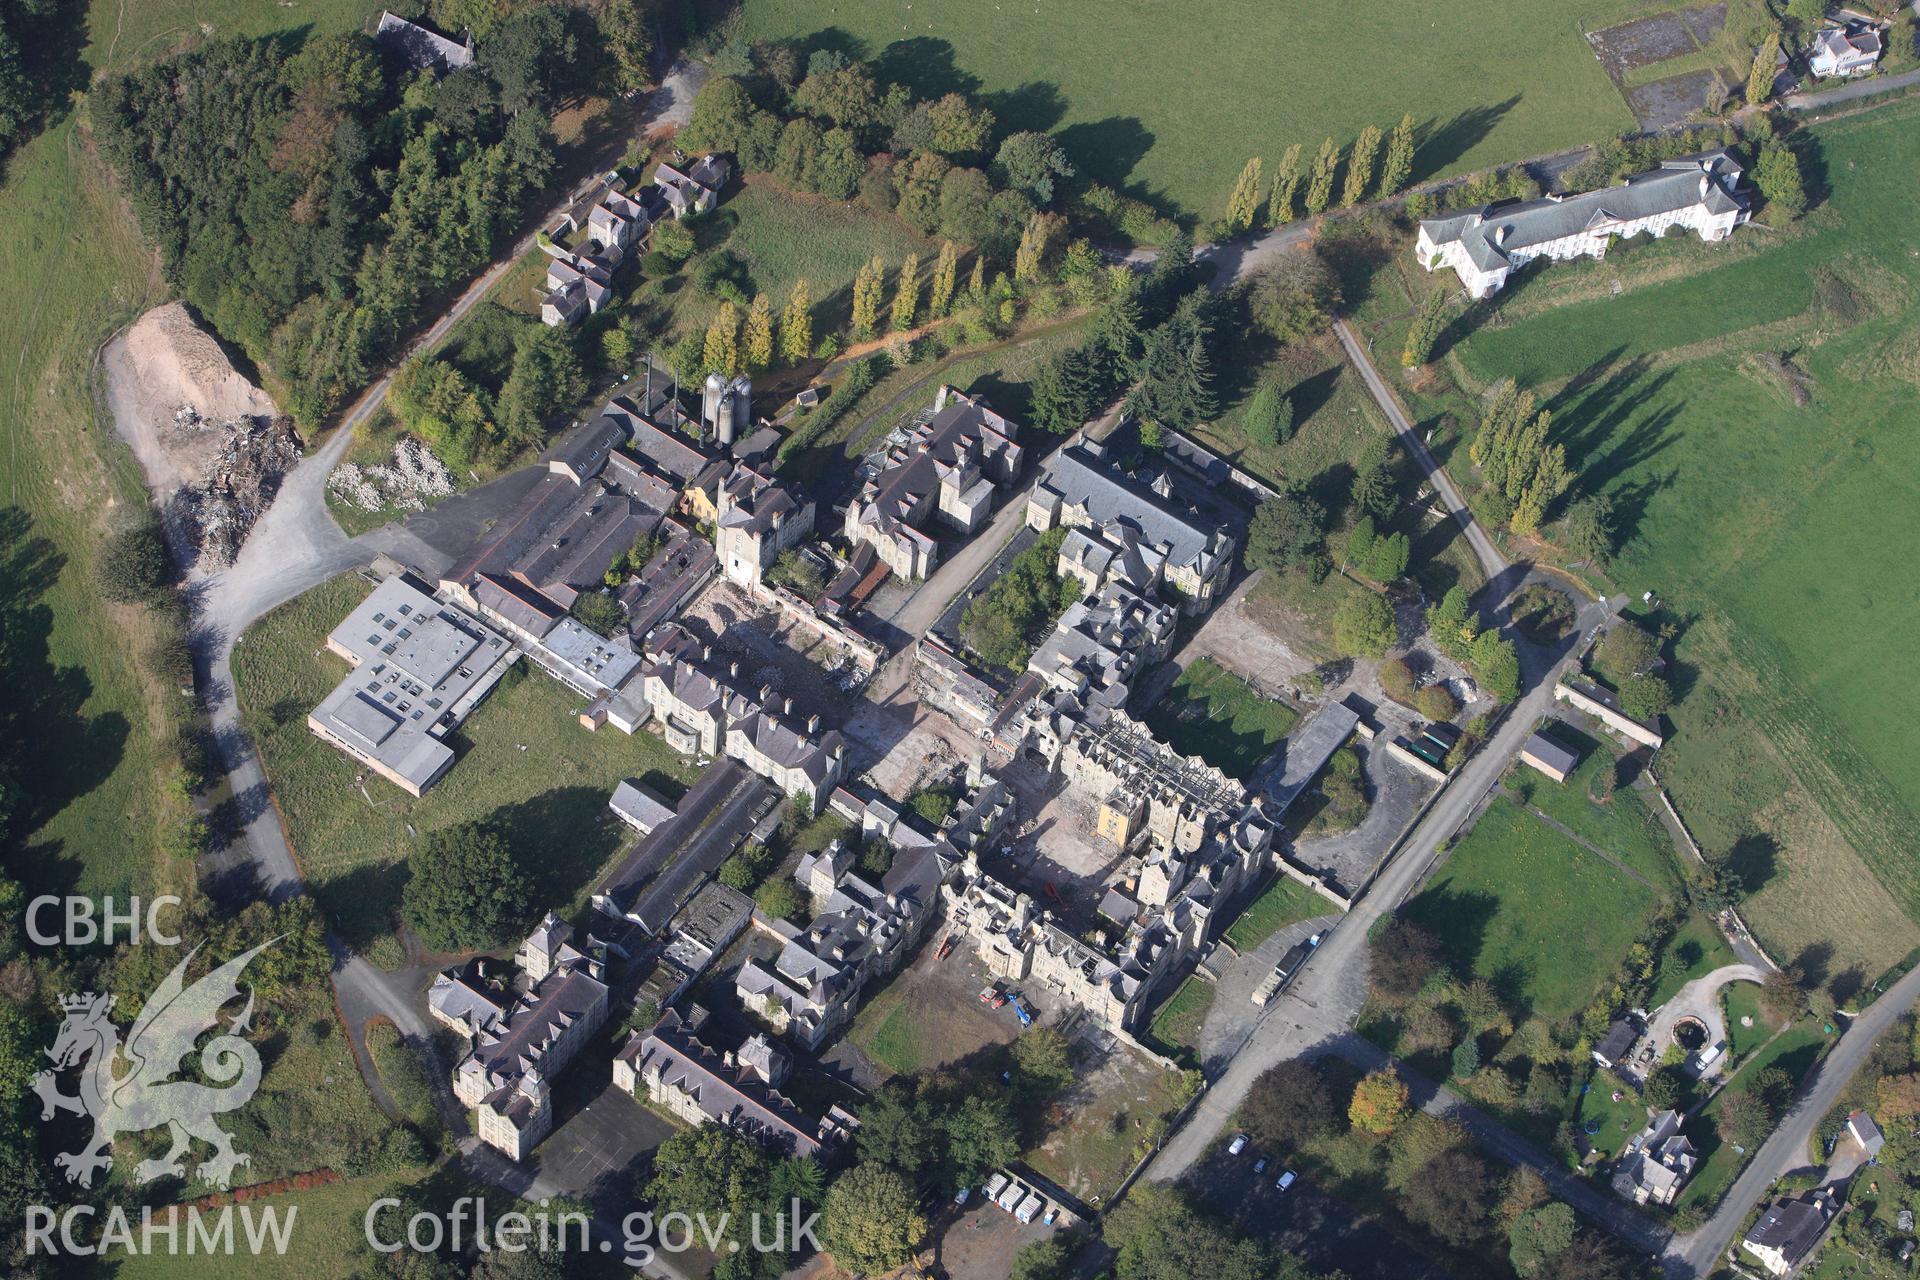 RCAHMW colour oblique photograph of North Wales Counties Hospital, Denbigh. Taken by Toby Driver on 04/10/2011.